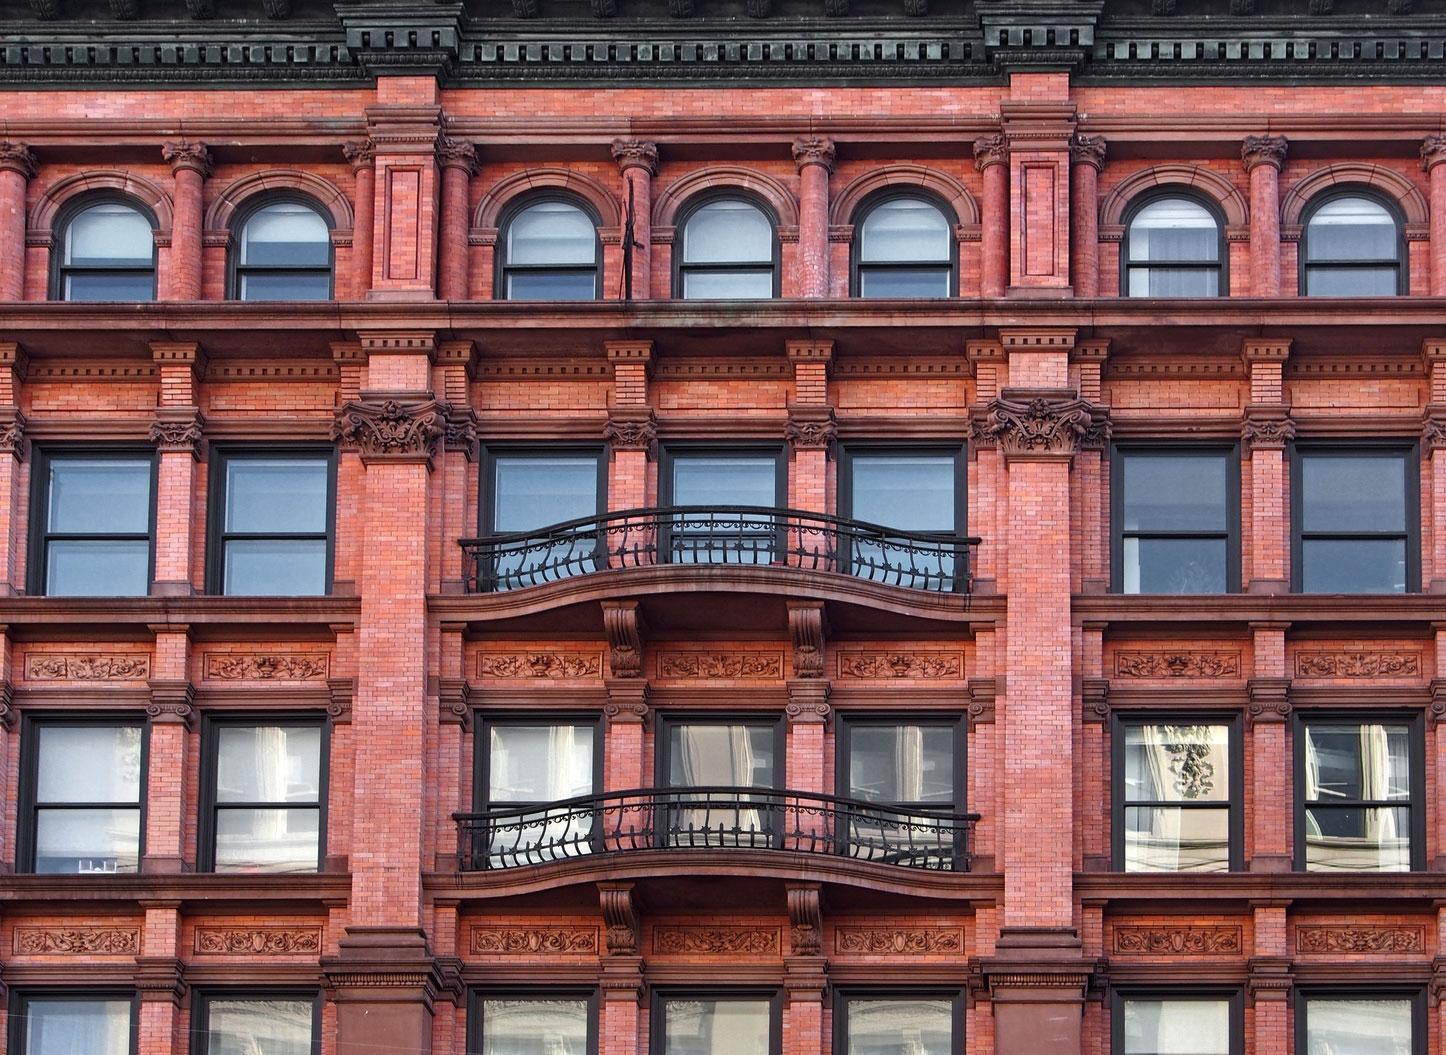 a red brick building with many windows and balconies